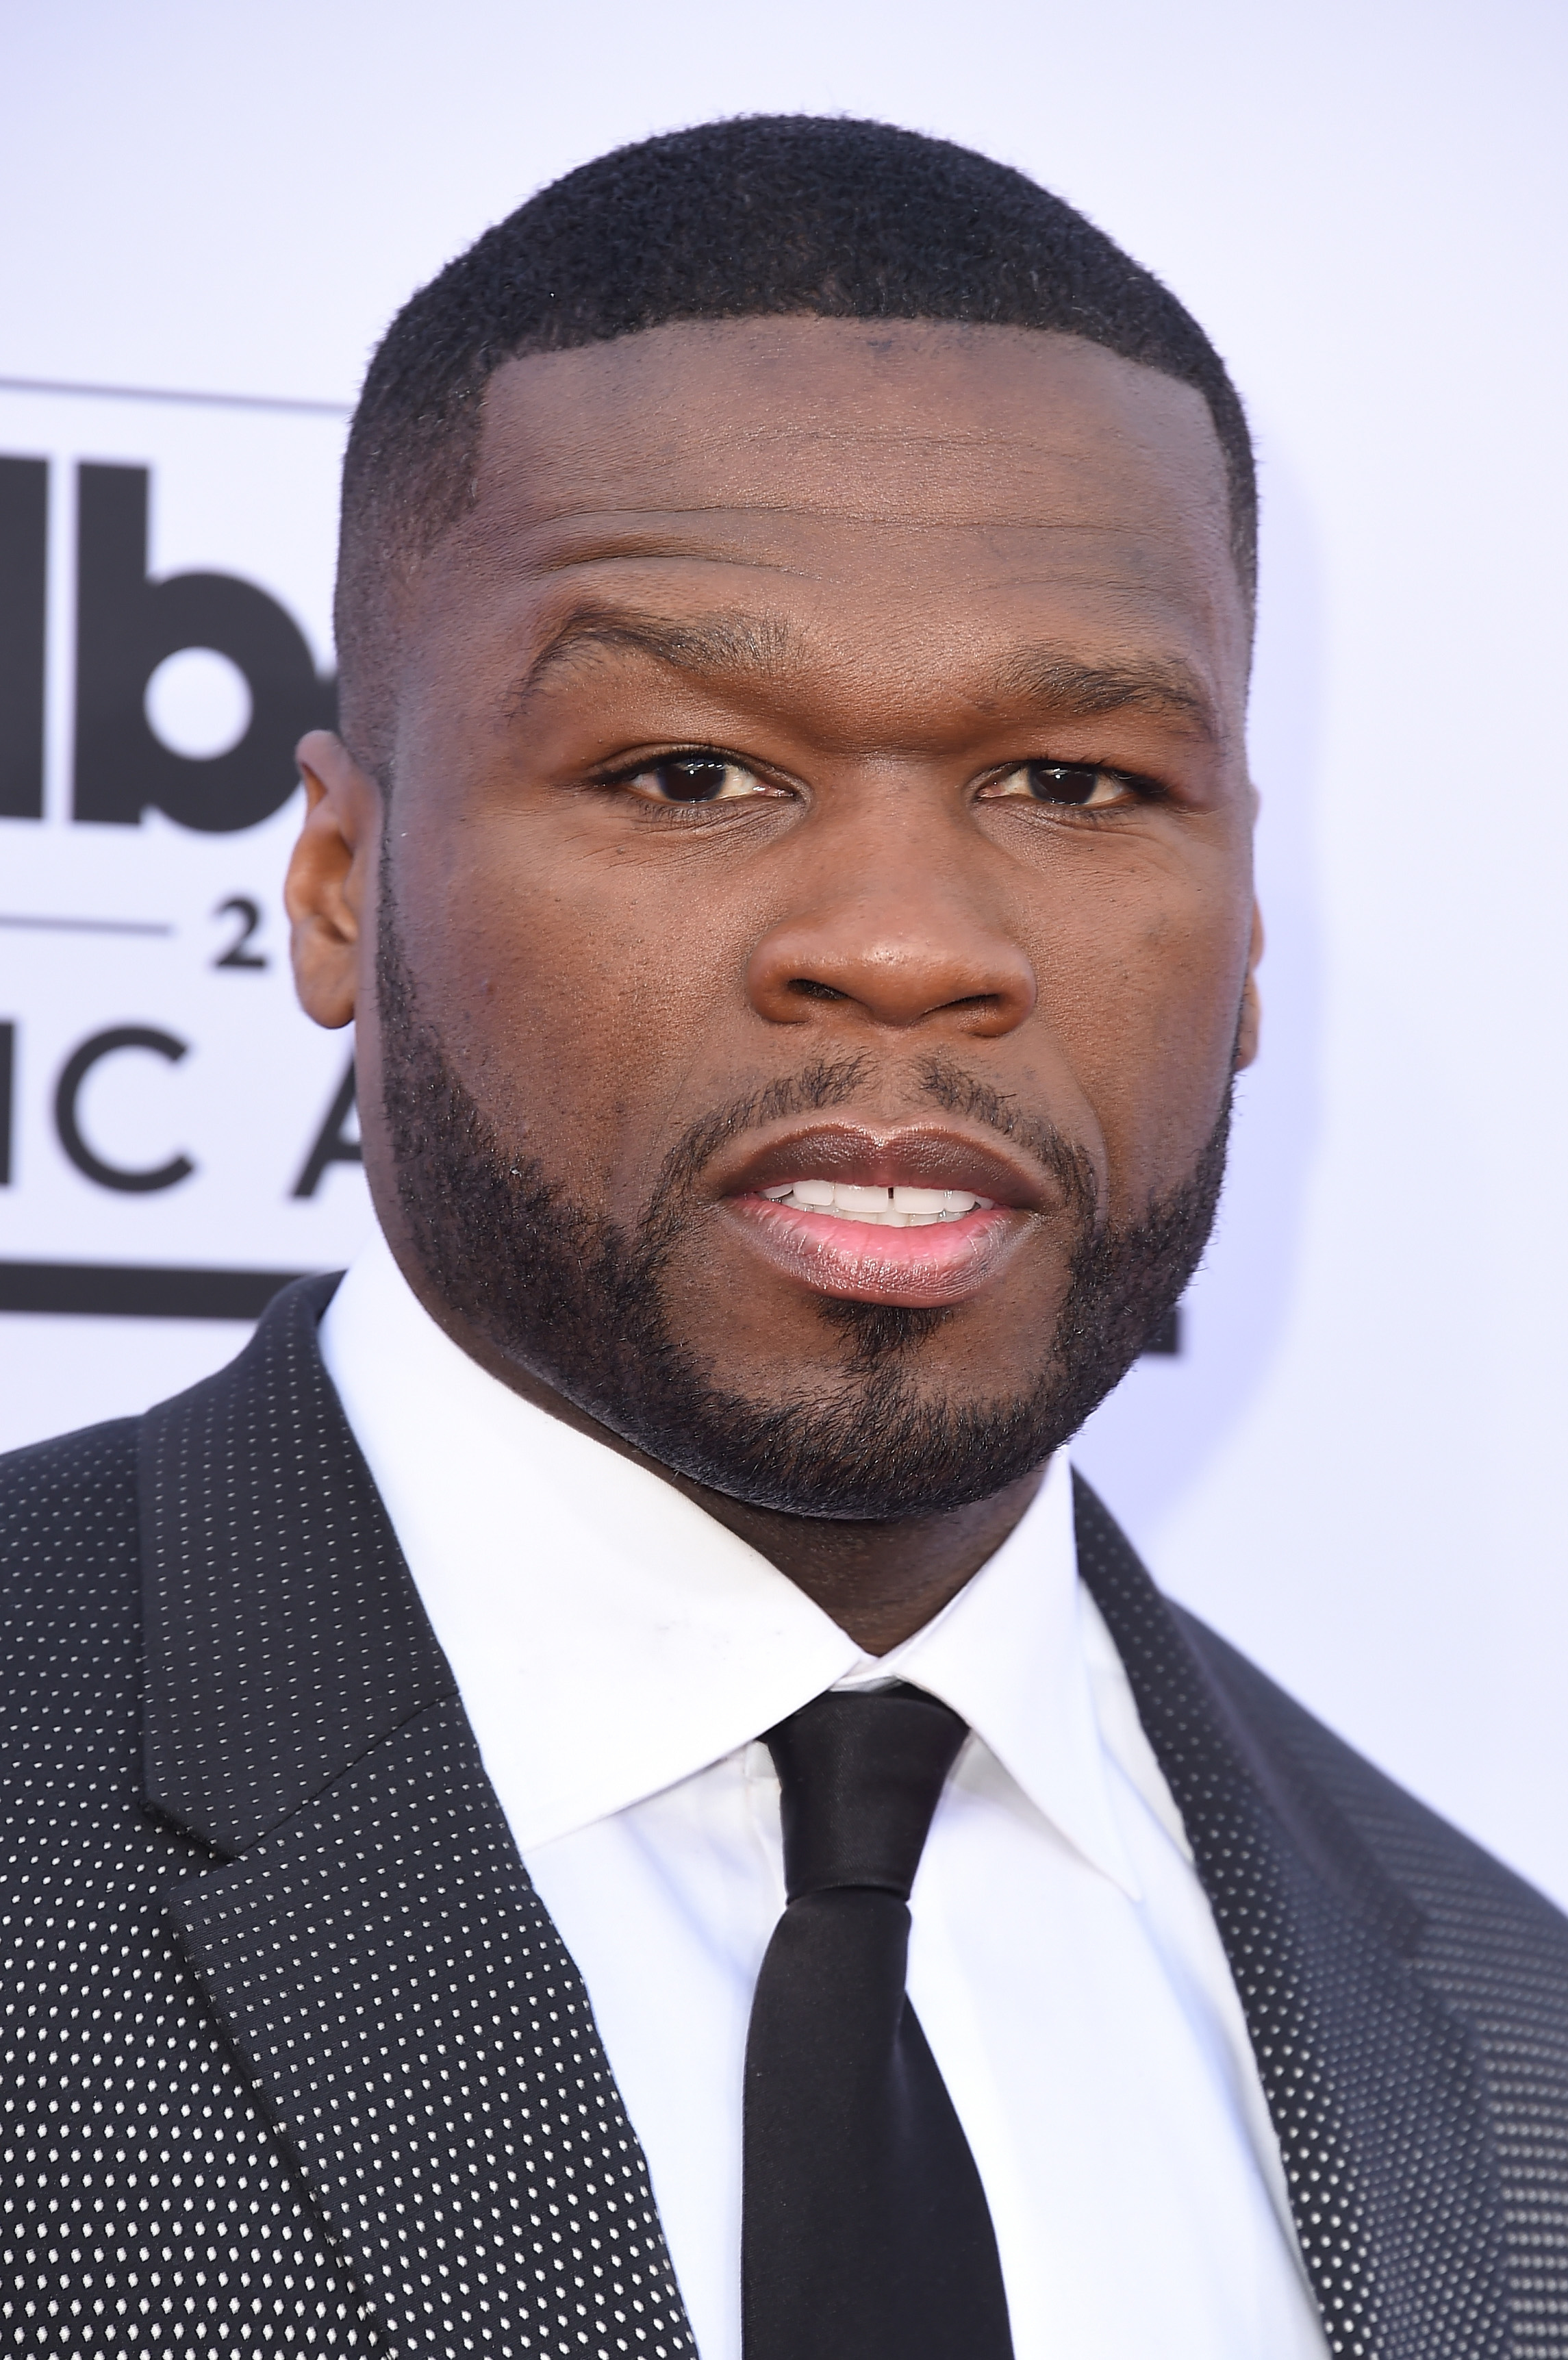 50 Cent Loses Lawsuit, Has To Fork Over $5 Million - 99.3-105.7 Kiss FM